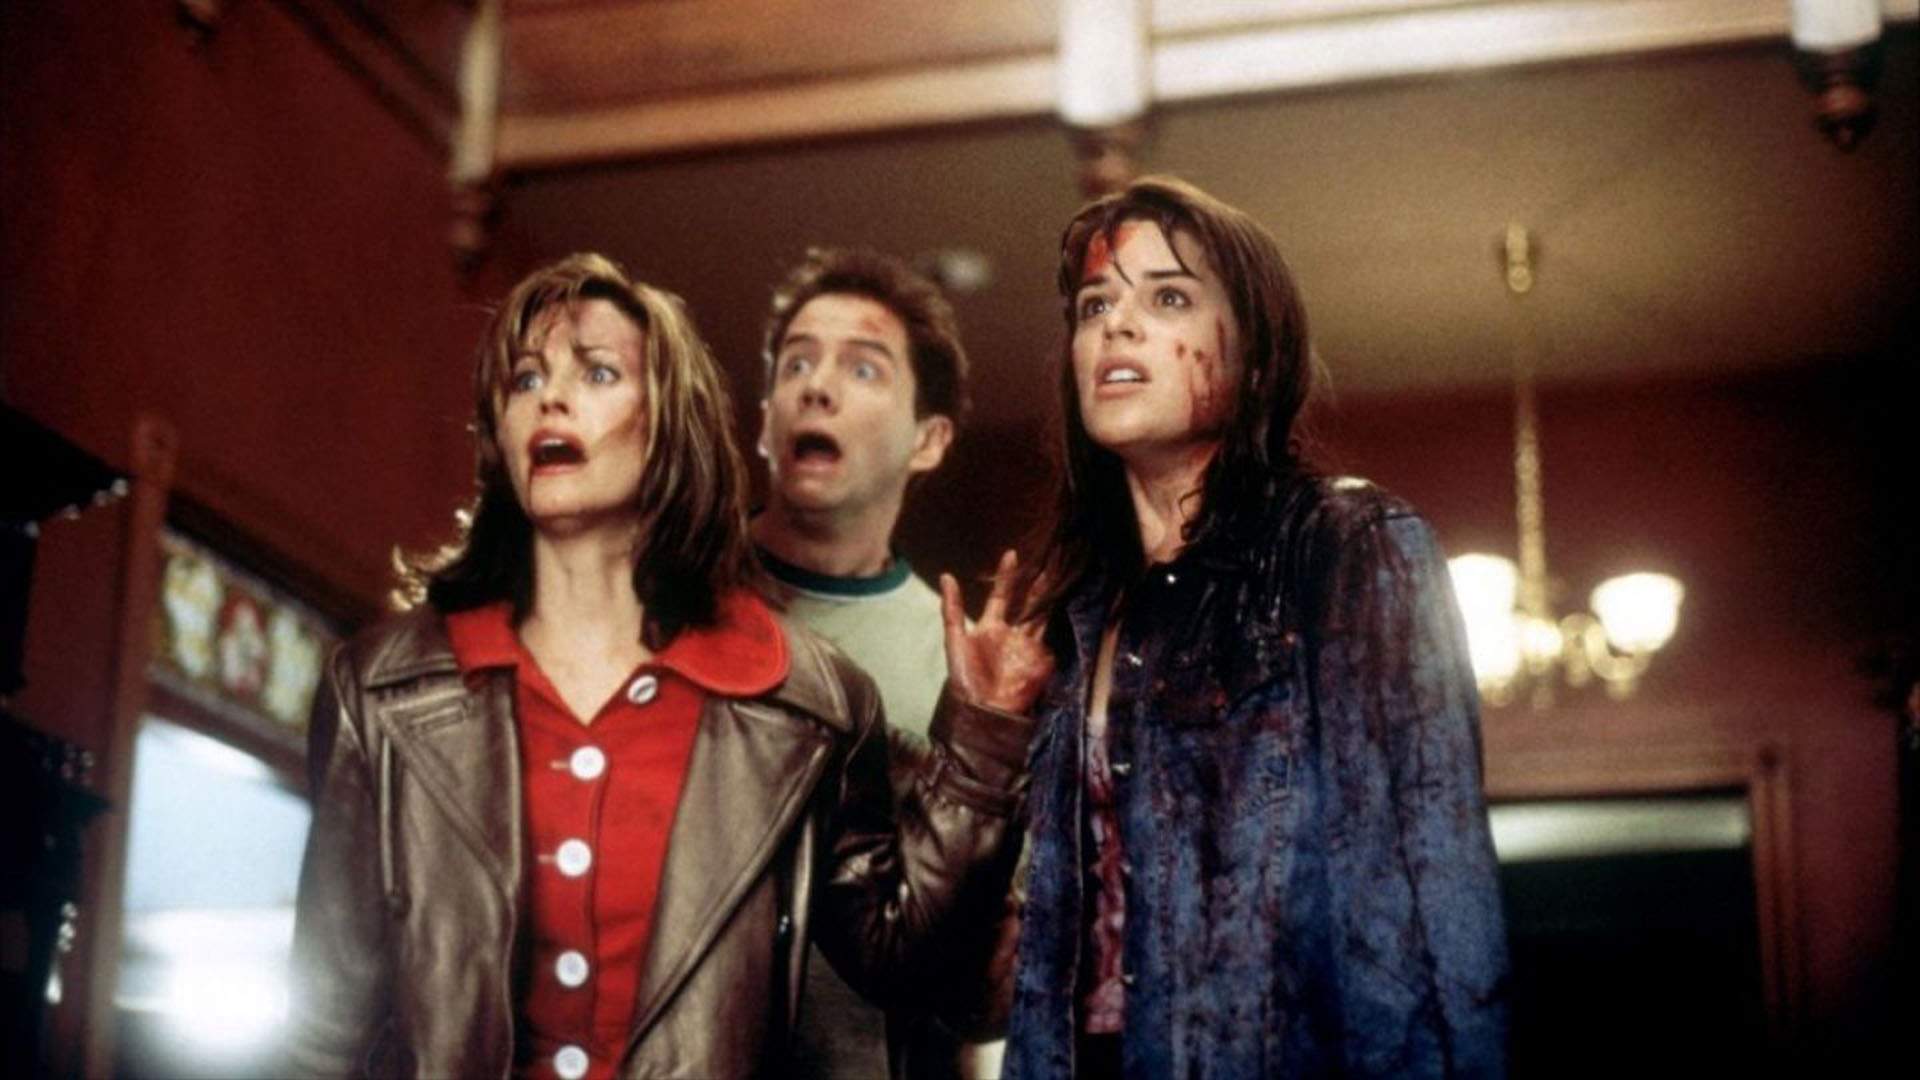 The 'Scream' Franchise Is Returning to the Big Screen with a Heap of Original Cast Members